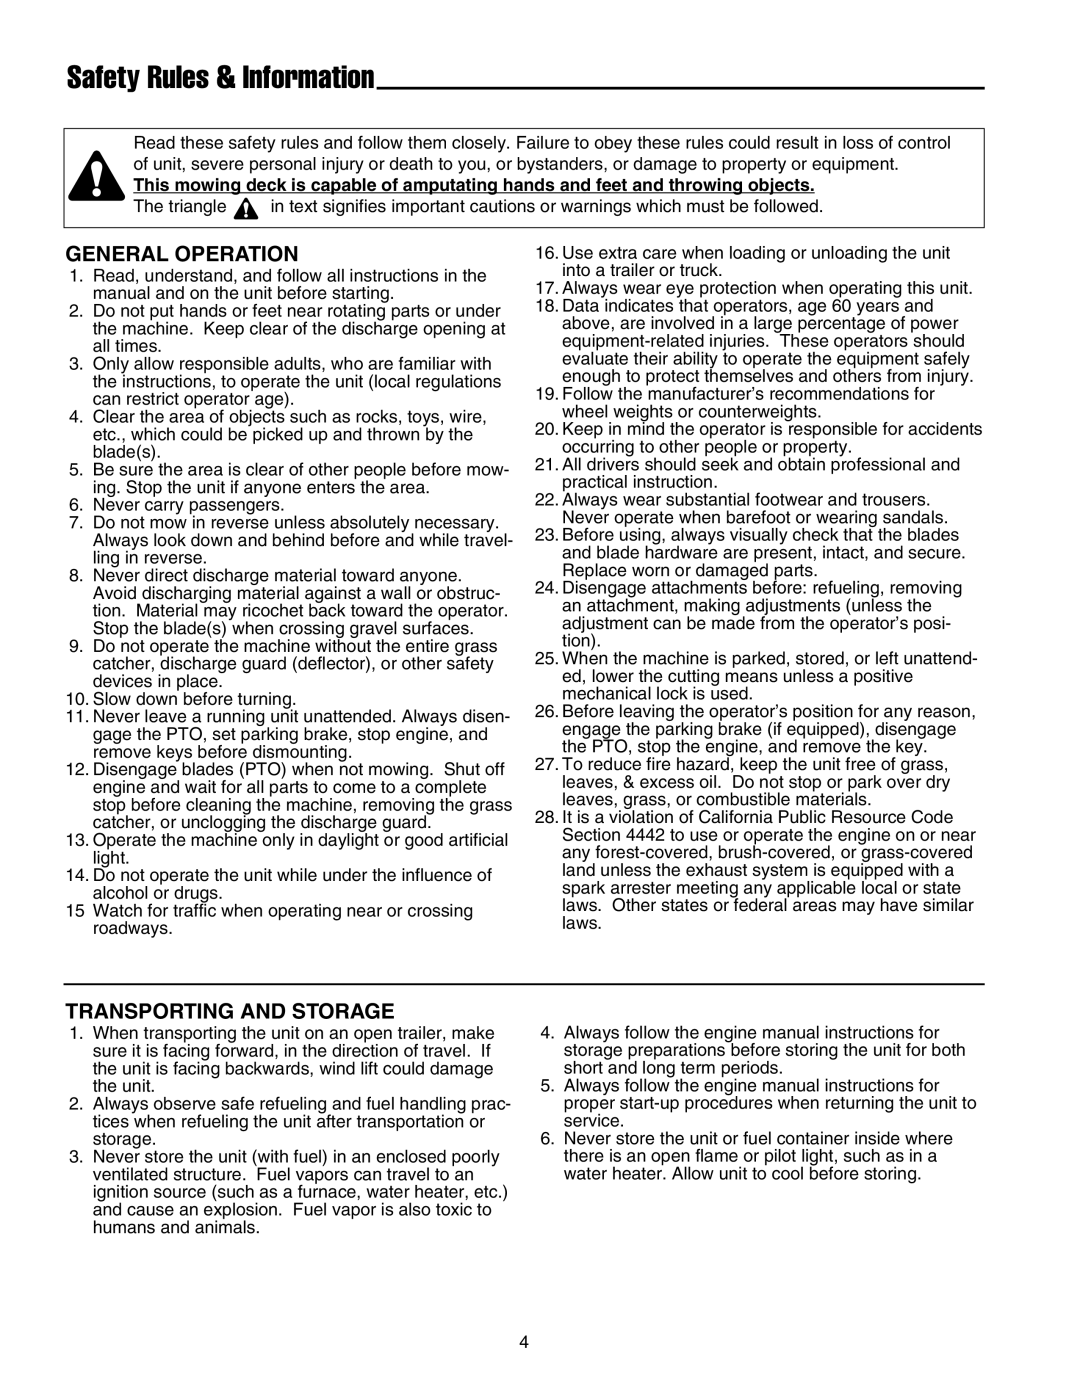 Snapper XL Series manual Safety Rules & Information, General Operation, Transporting And Storage 